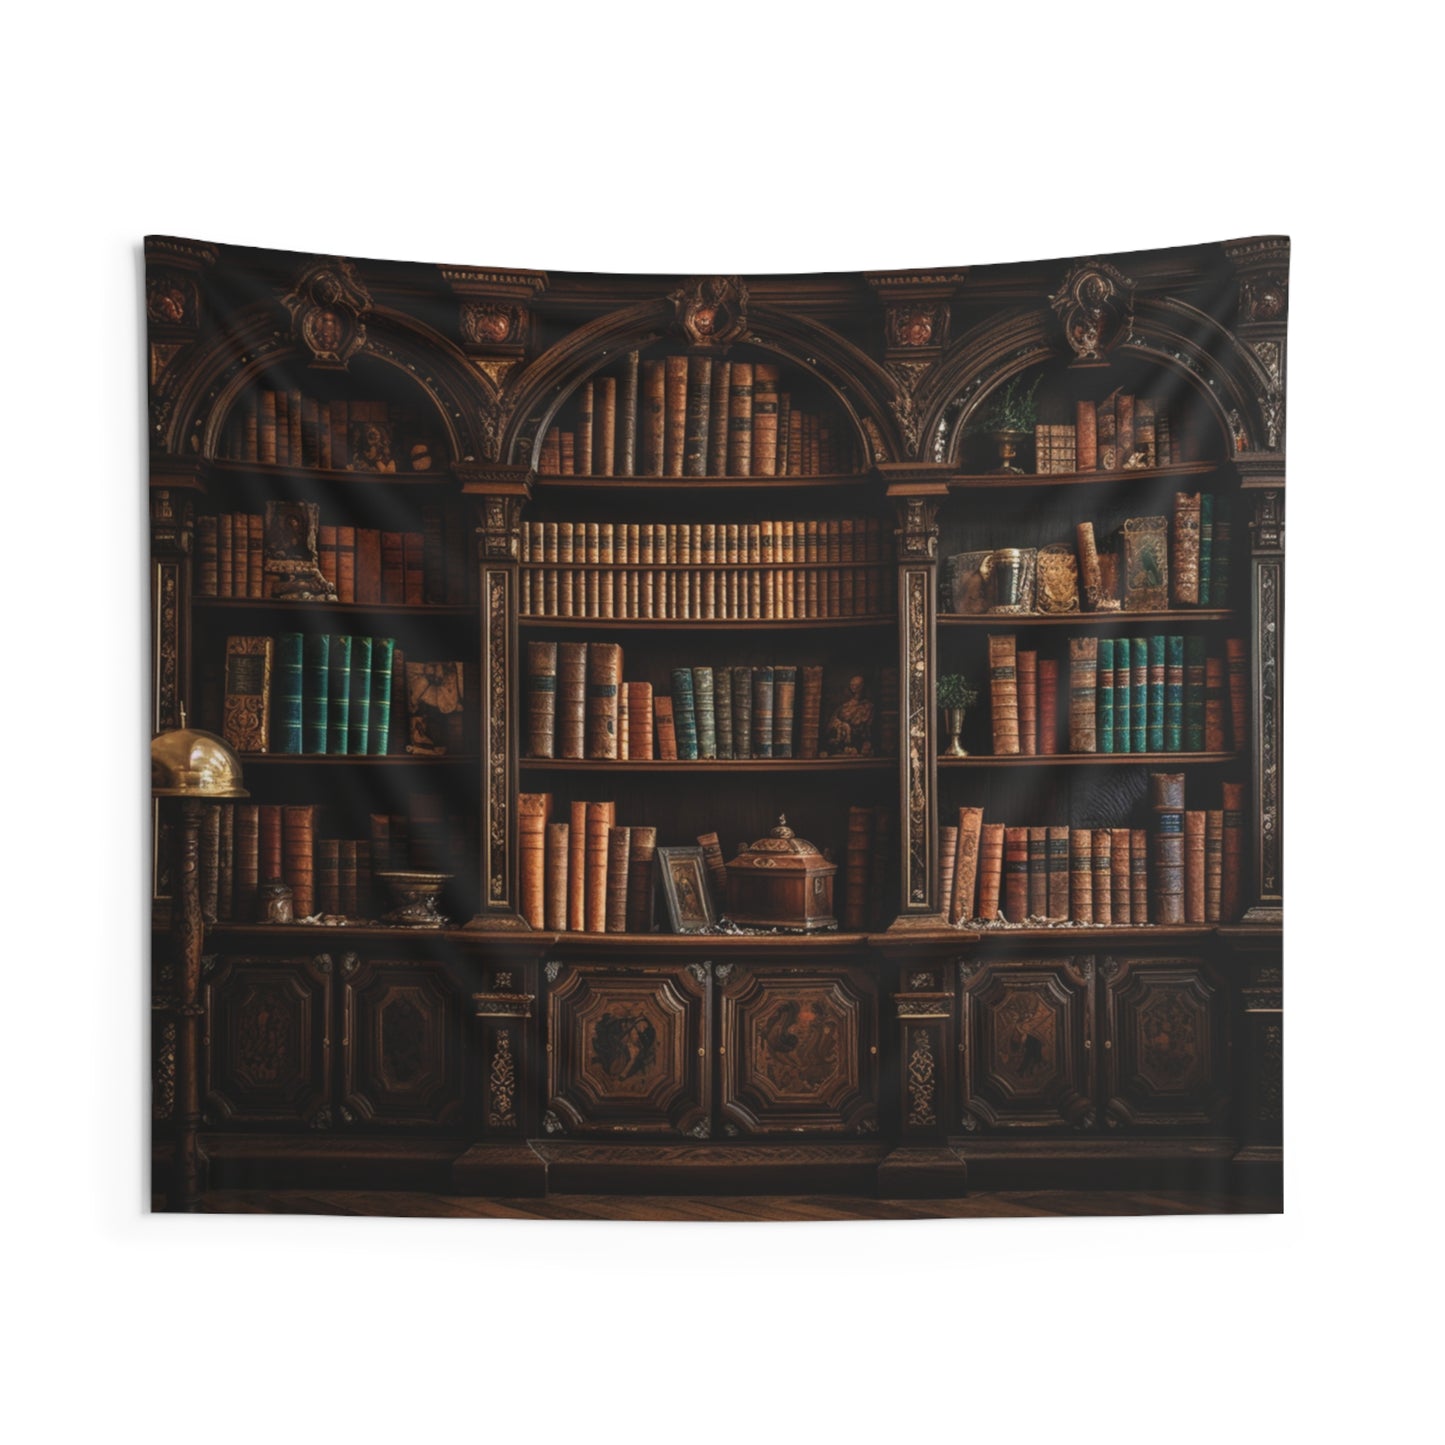 Reading Tapestry, Books Bookshelf Library Wall Art Hanging Landscape Aesthetic Large Small Decor Bedroom College Dorm Room